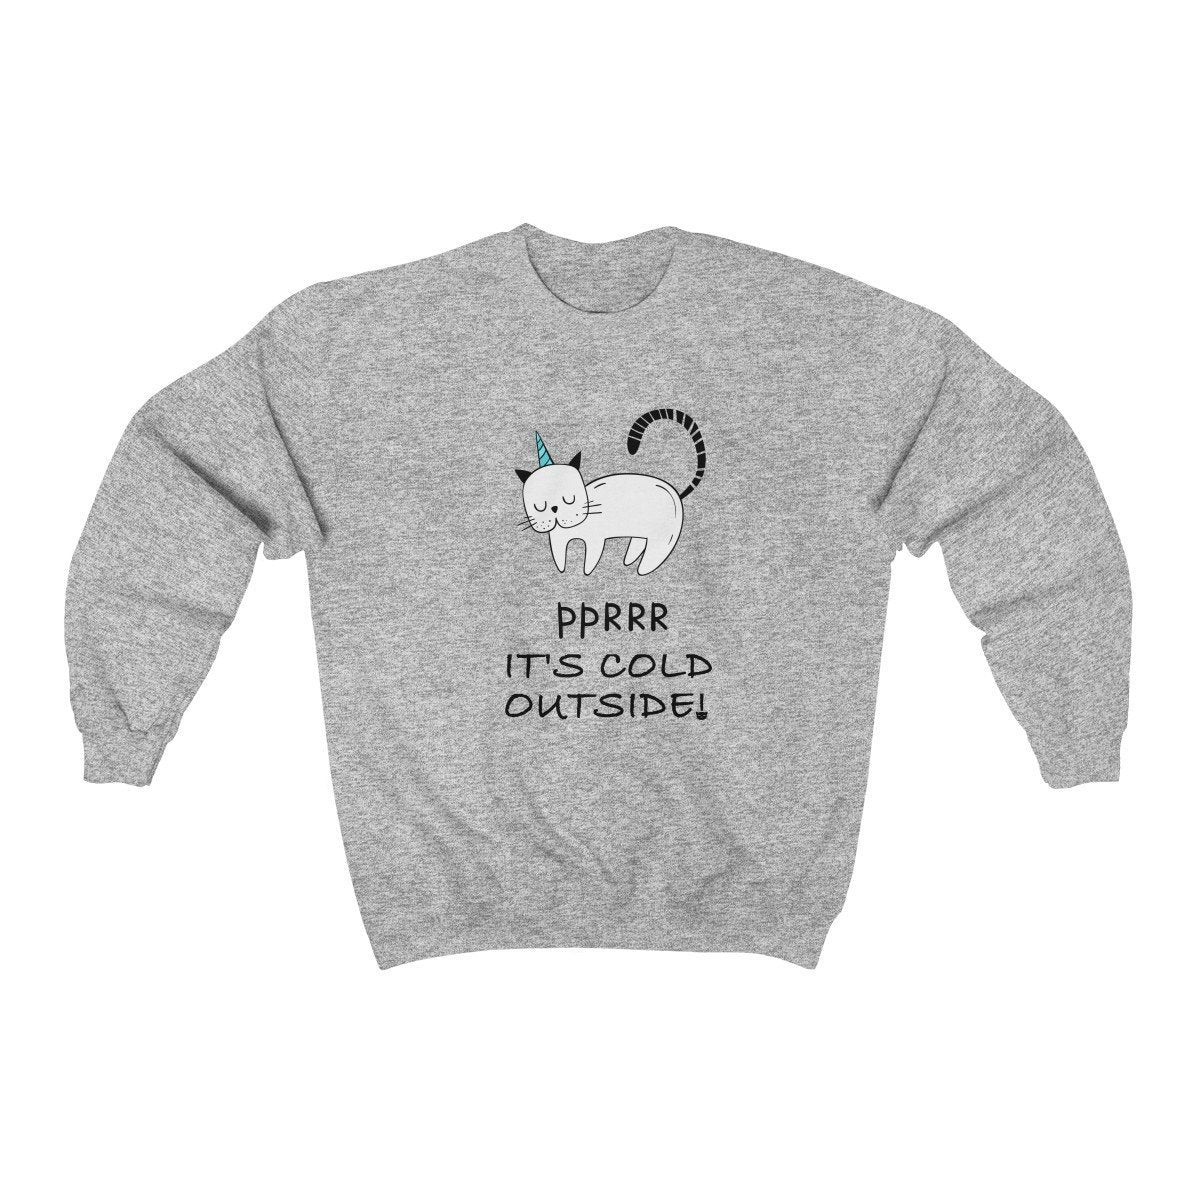 Cat Christmas Sweater, Pprr It's Cold Outside Cat Sweater Decorated with a Unicorn Cat